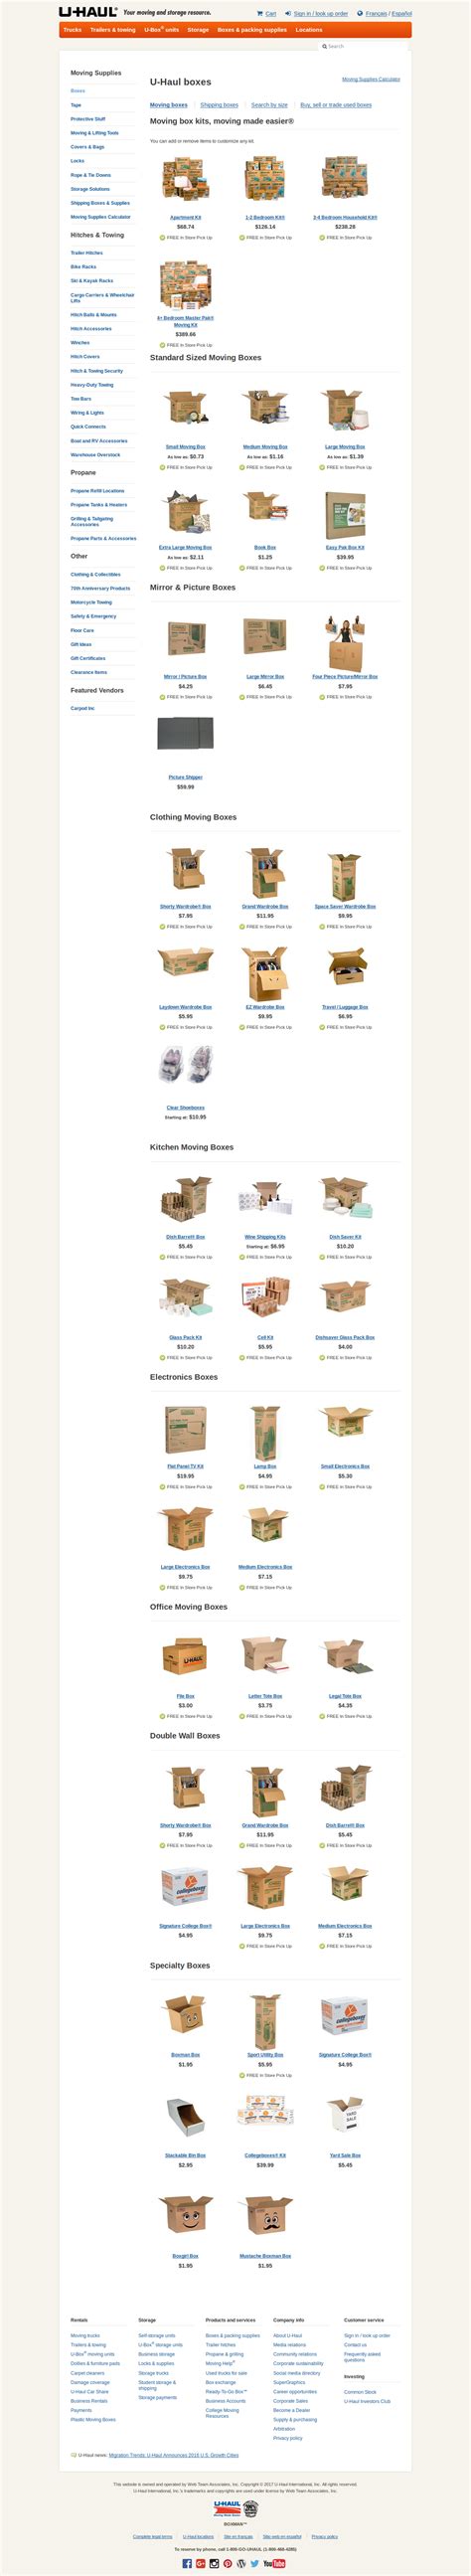 5 Websites To Buy Reasonable Moving Boxes And Packaging Materials By